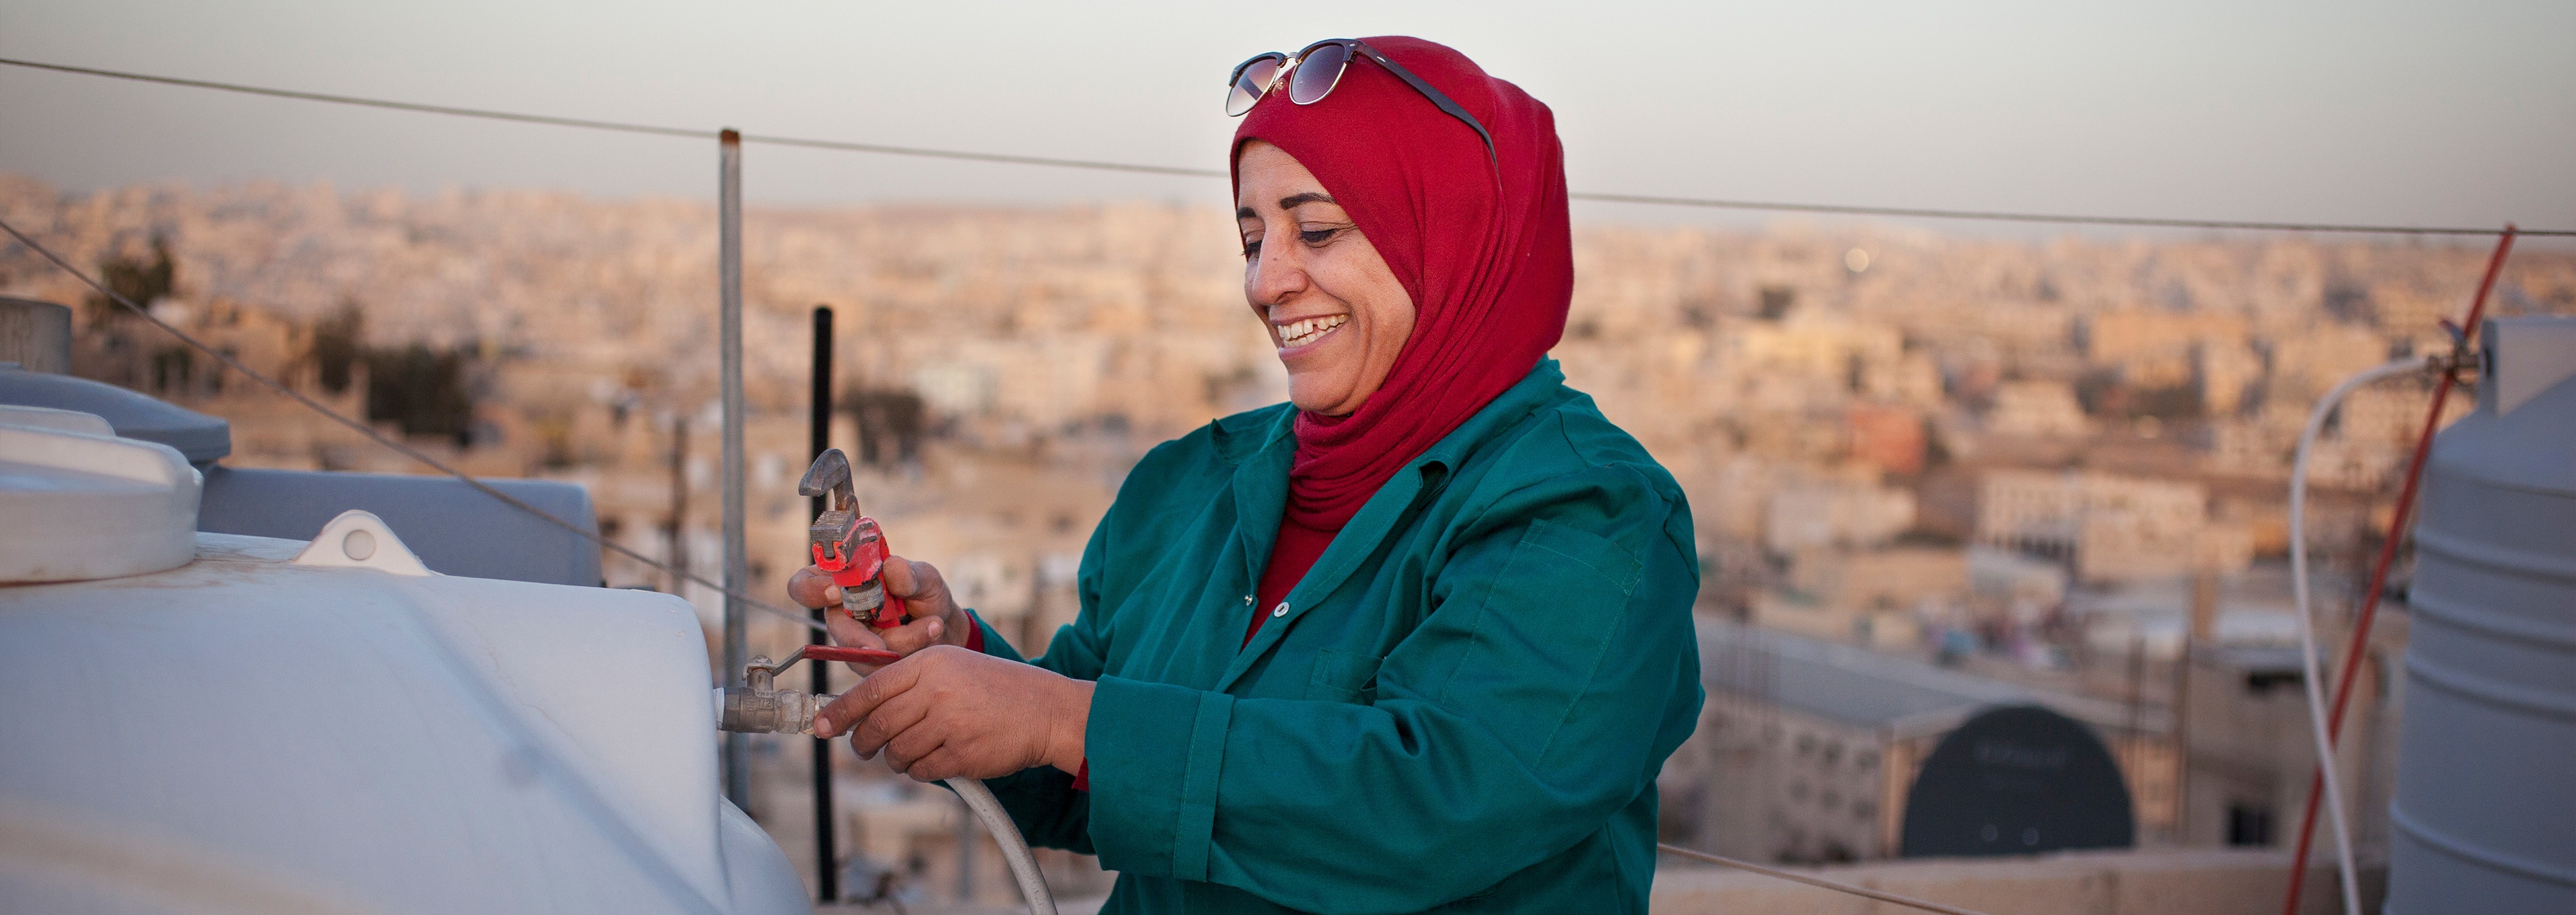 LVRSustainable for Oxfam: Empowering Women, Improving Society | La storia di Mariam